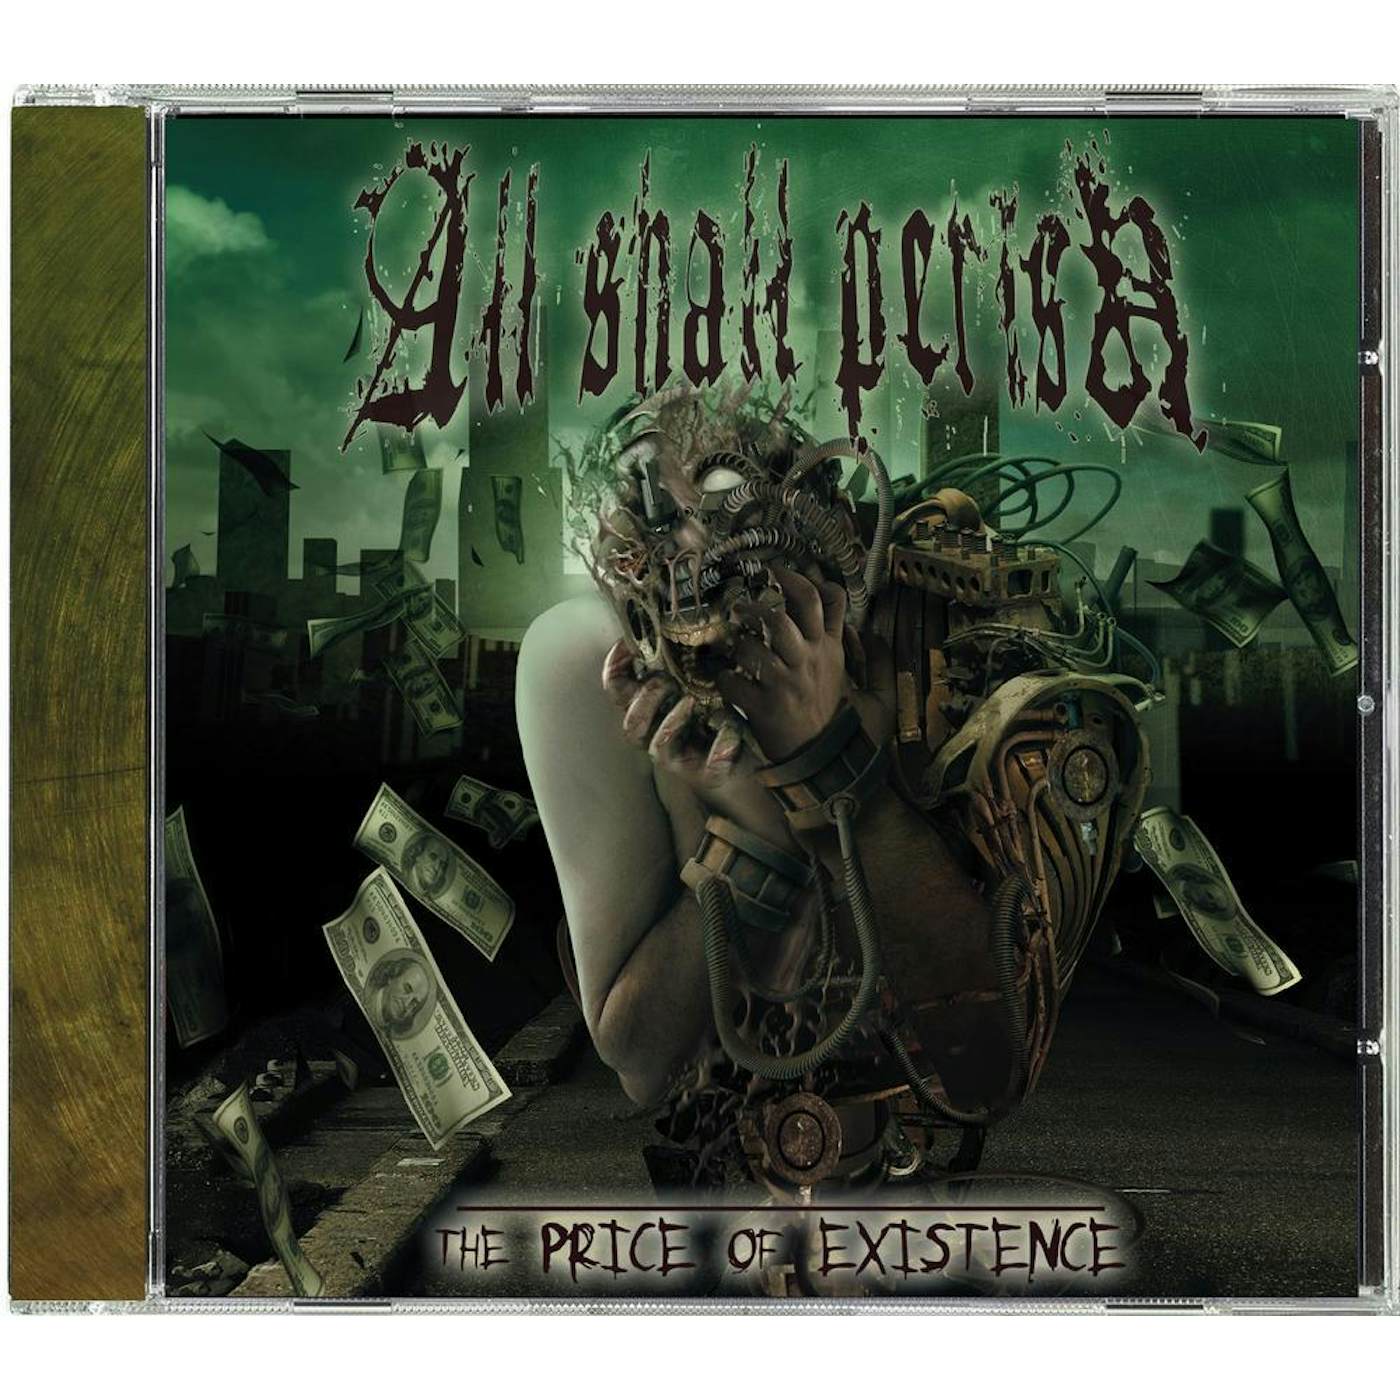 All Shall Perish "The Price Of Existence" CD